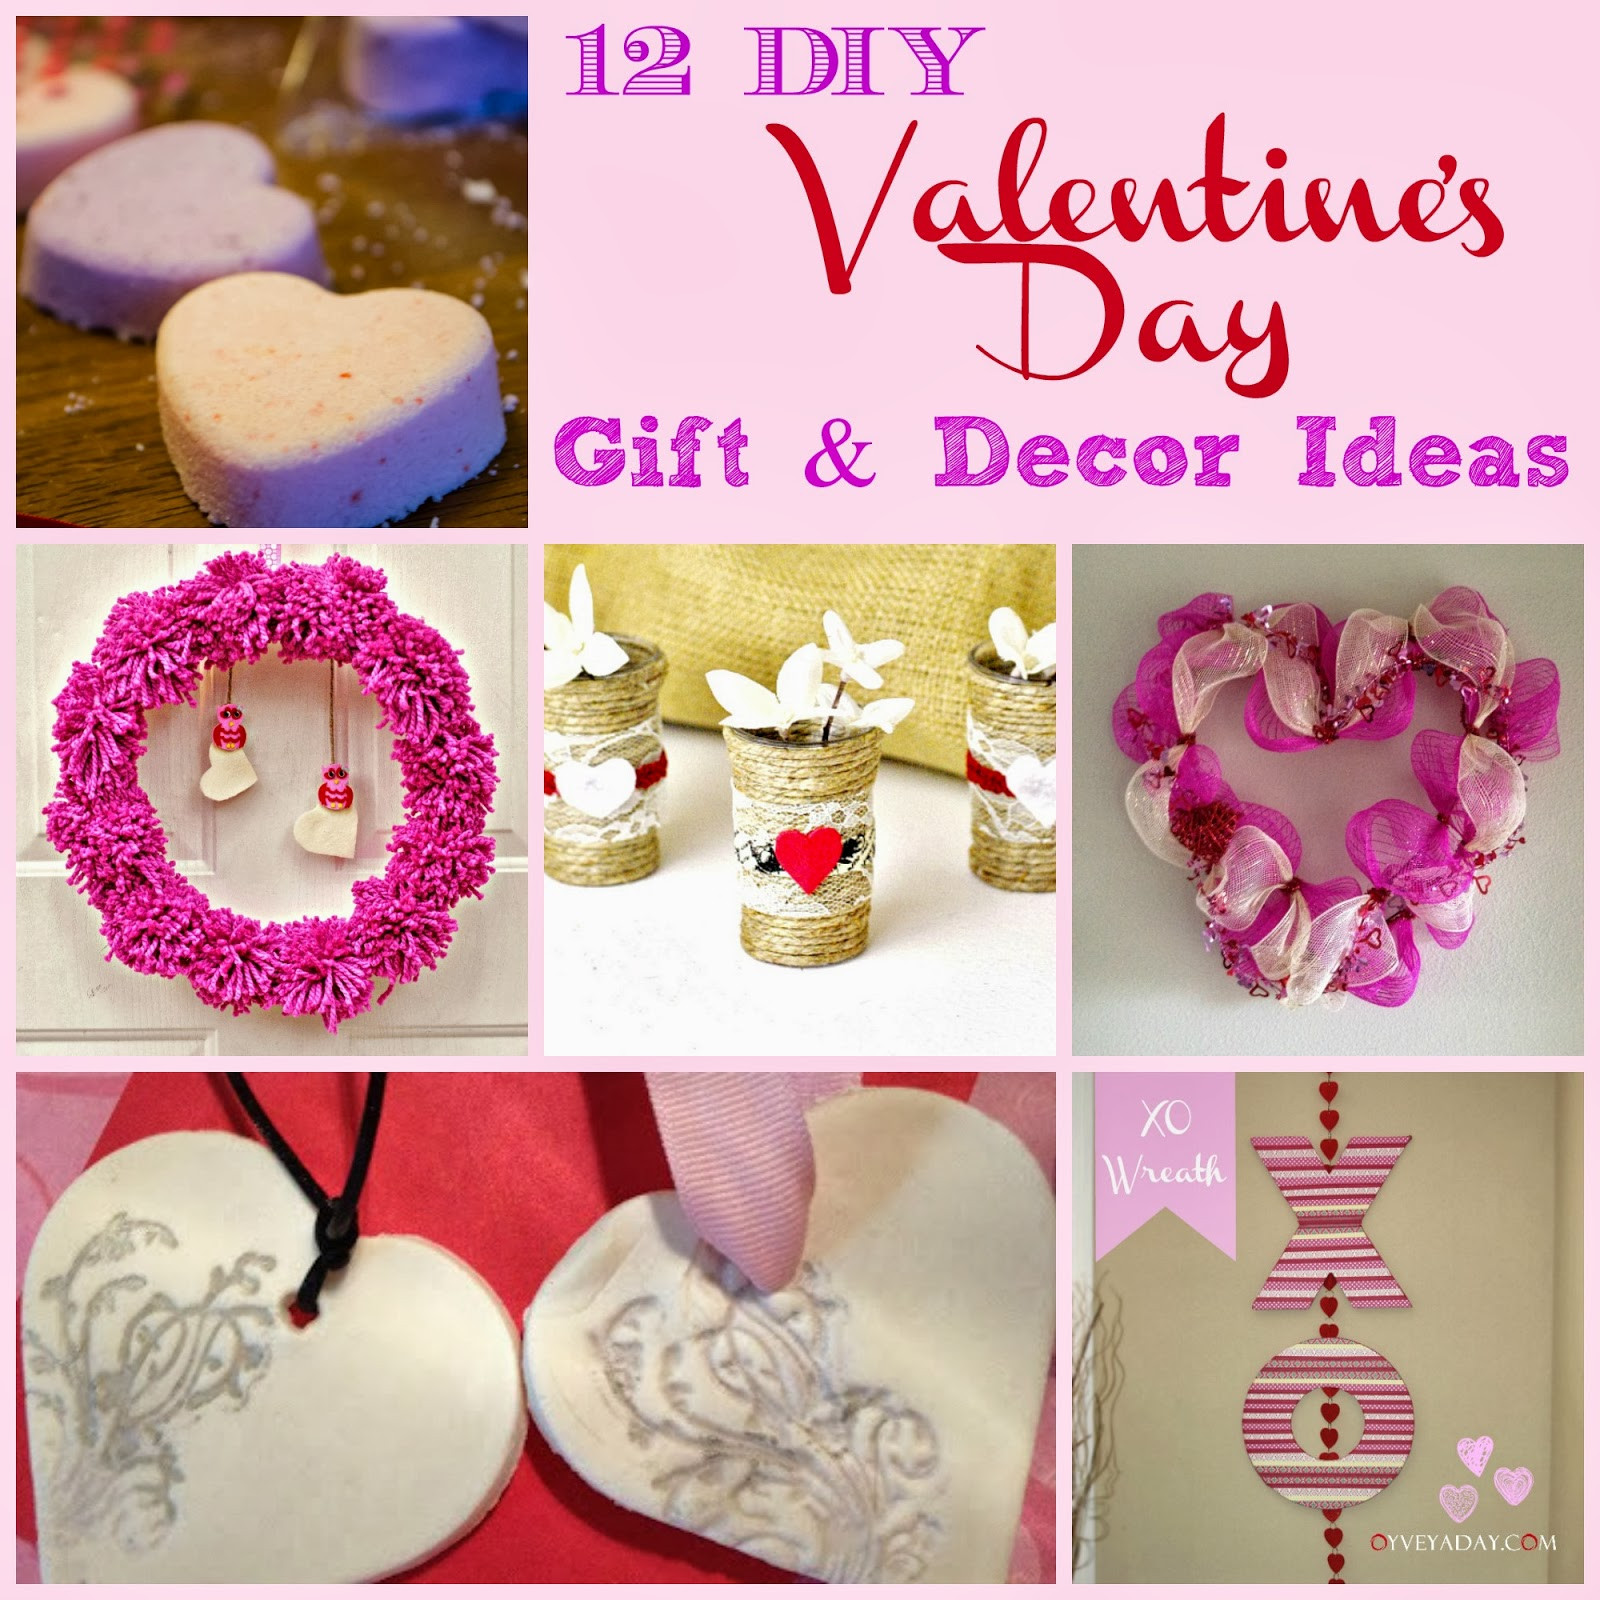 Valentines Day Ideas Gift
 12 DIY Valentine s Day Gift & Decor Ideas Outnumbered 3 to 1